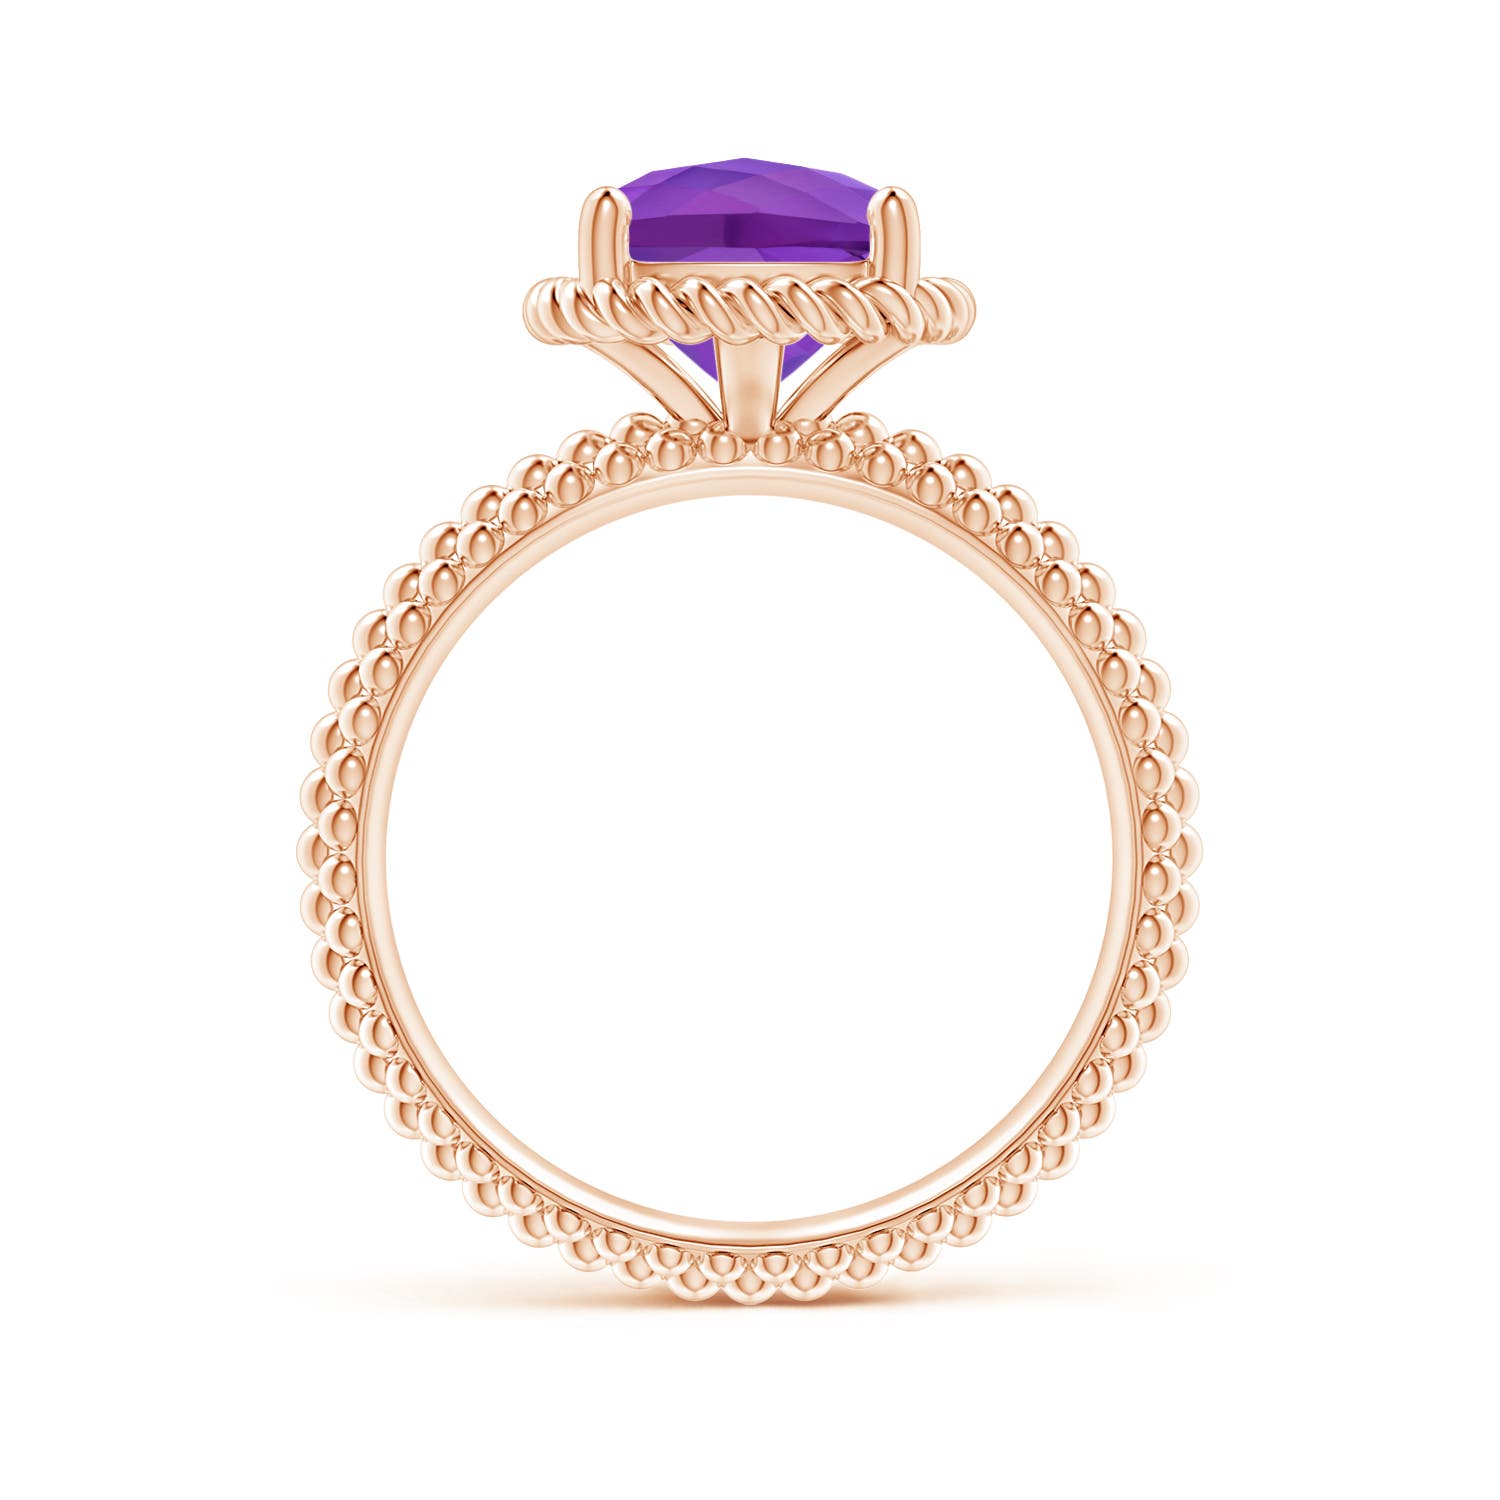 AAA - Amethyst / 2.2 CT / 14 KT Rose Gold